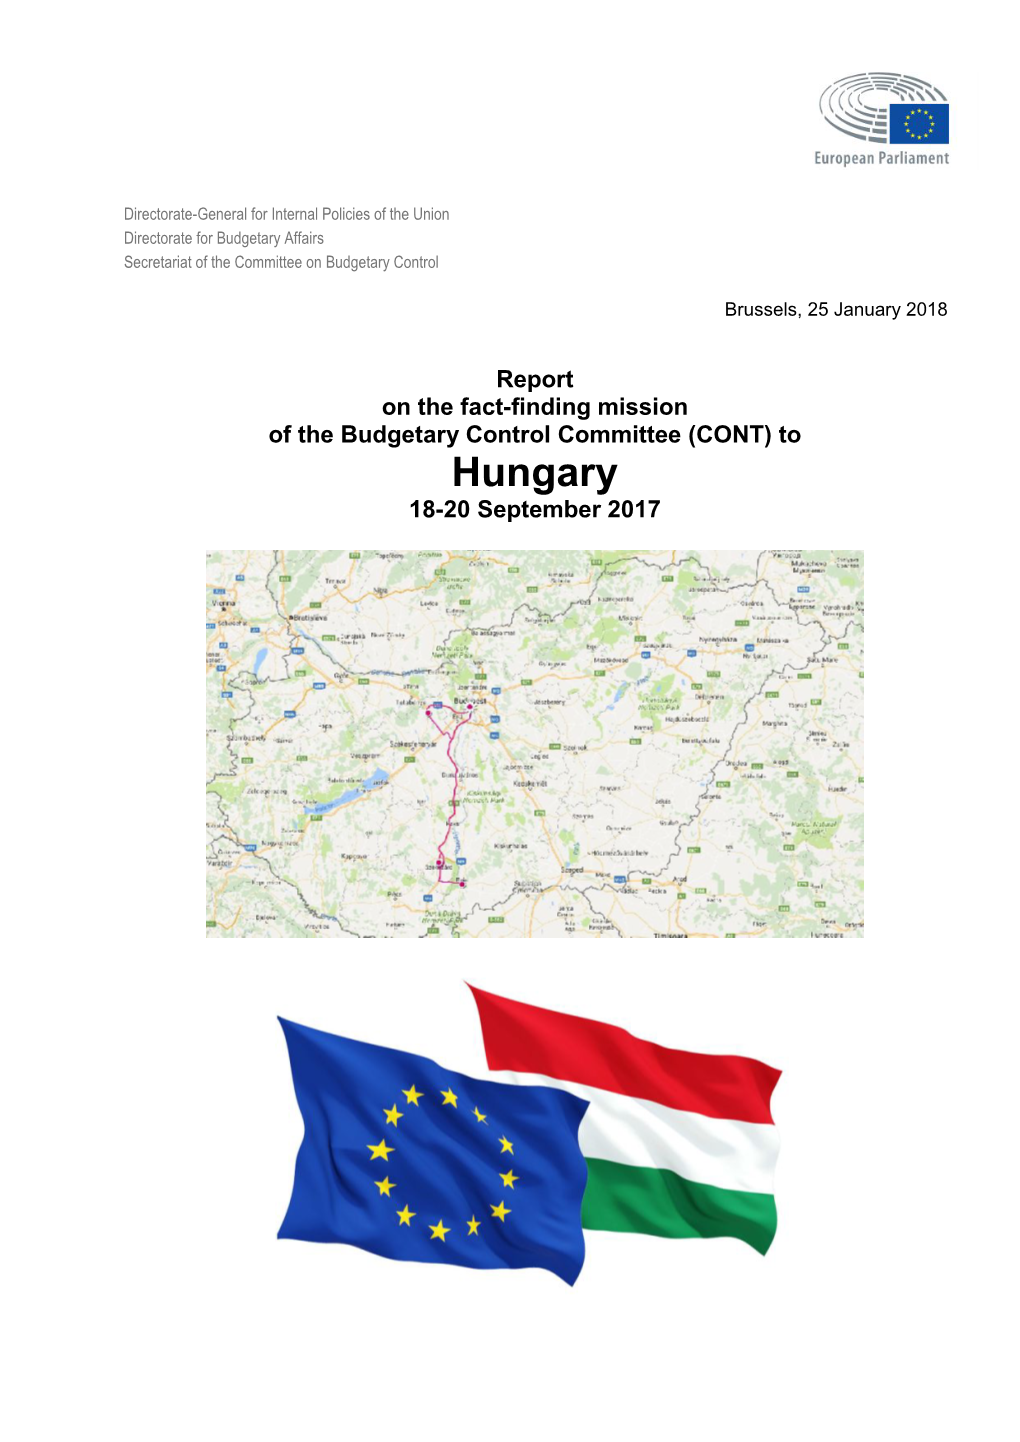 Hungary 18-20 September 2017 2 Summary and Recommendations